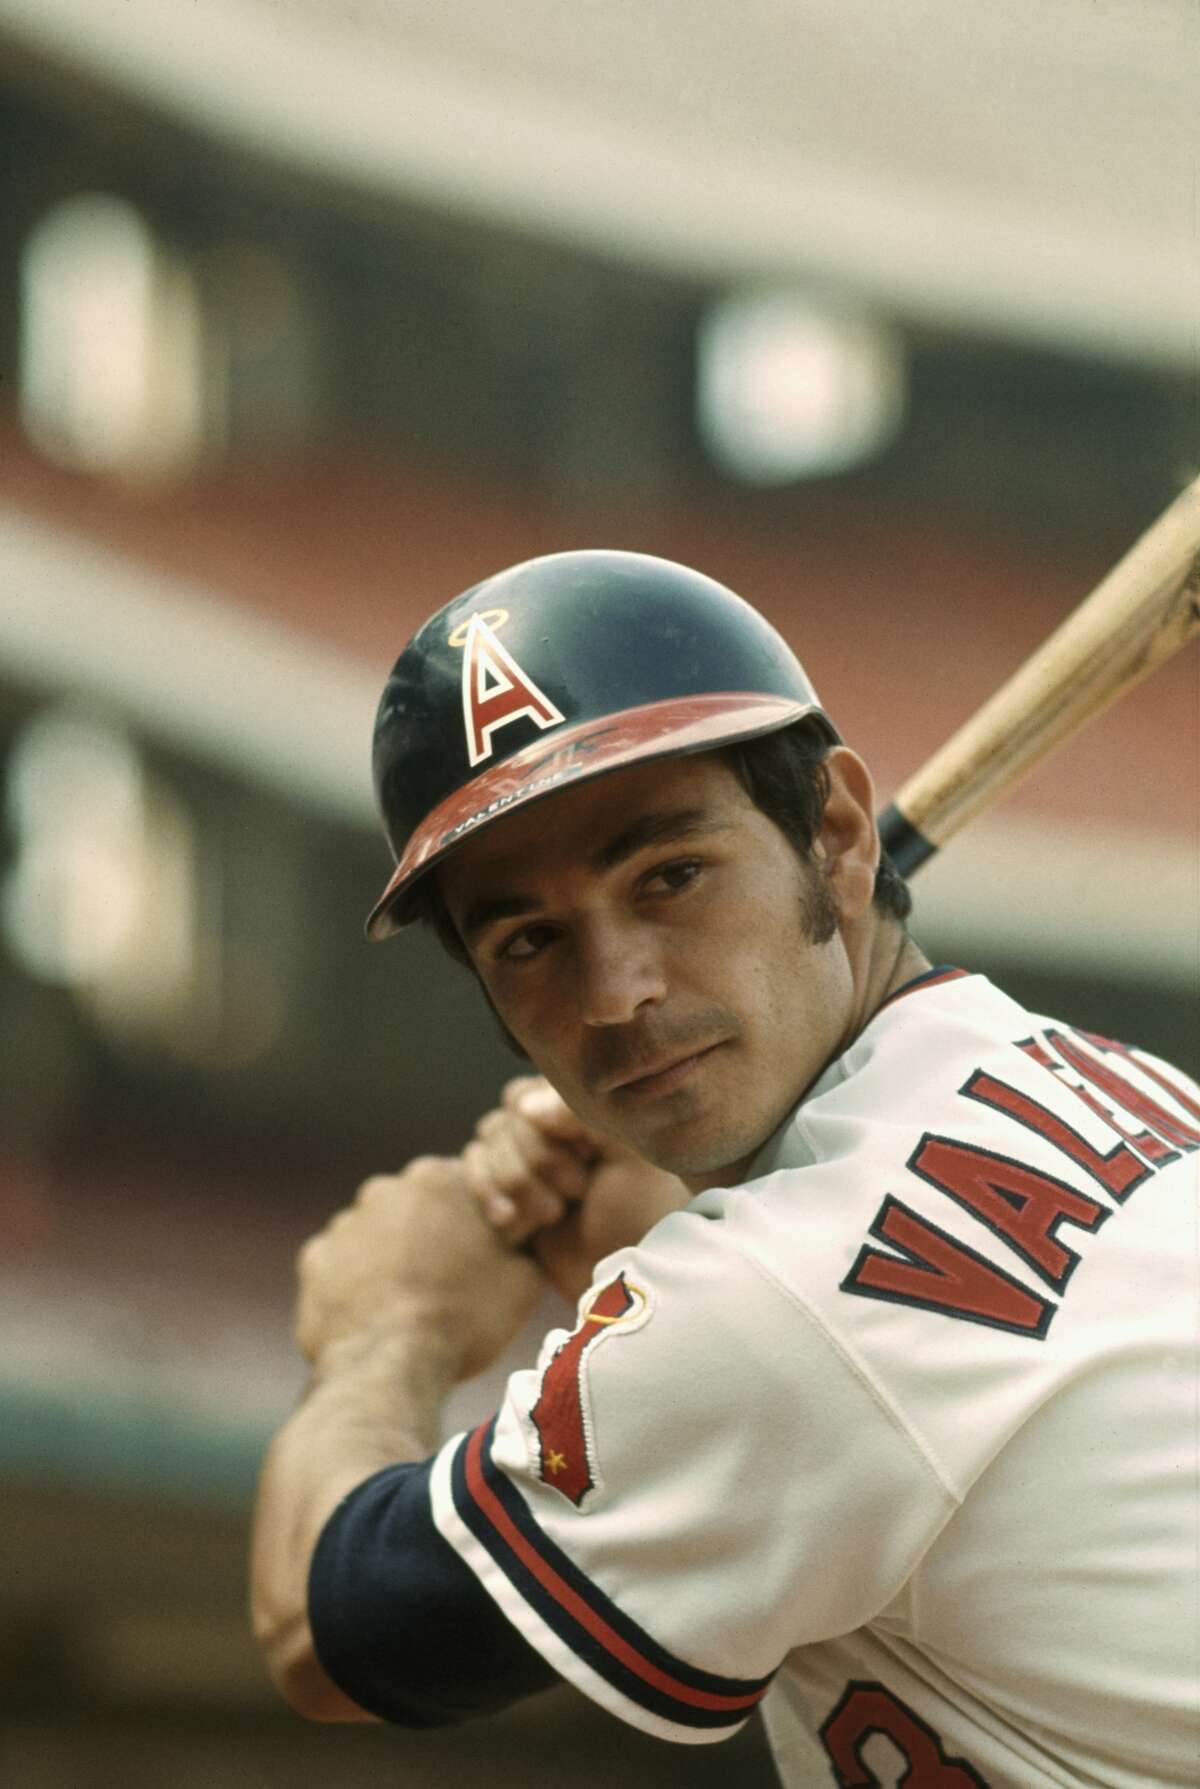 California Angels Bobby Valentine at Anaheim Stadium in Anaheim. Bobby Valentine played for the Angels from 1973-1975. (Photo by Angels Baseball LP/Getty Images)